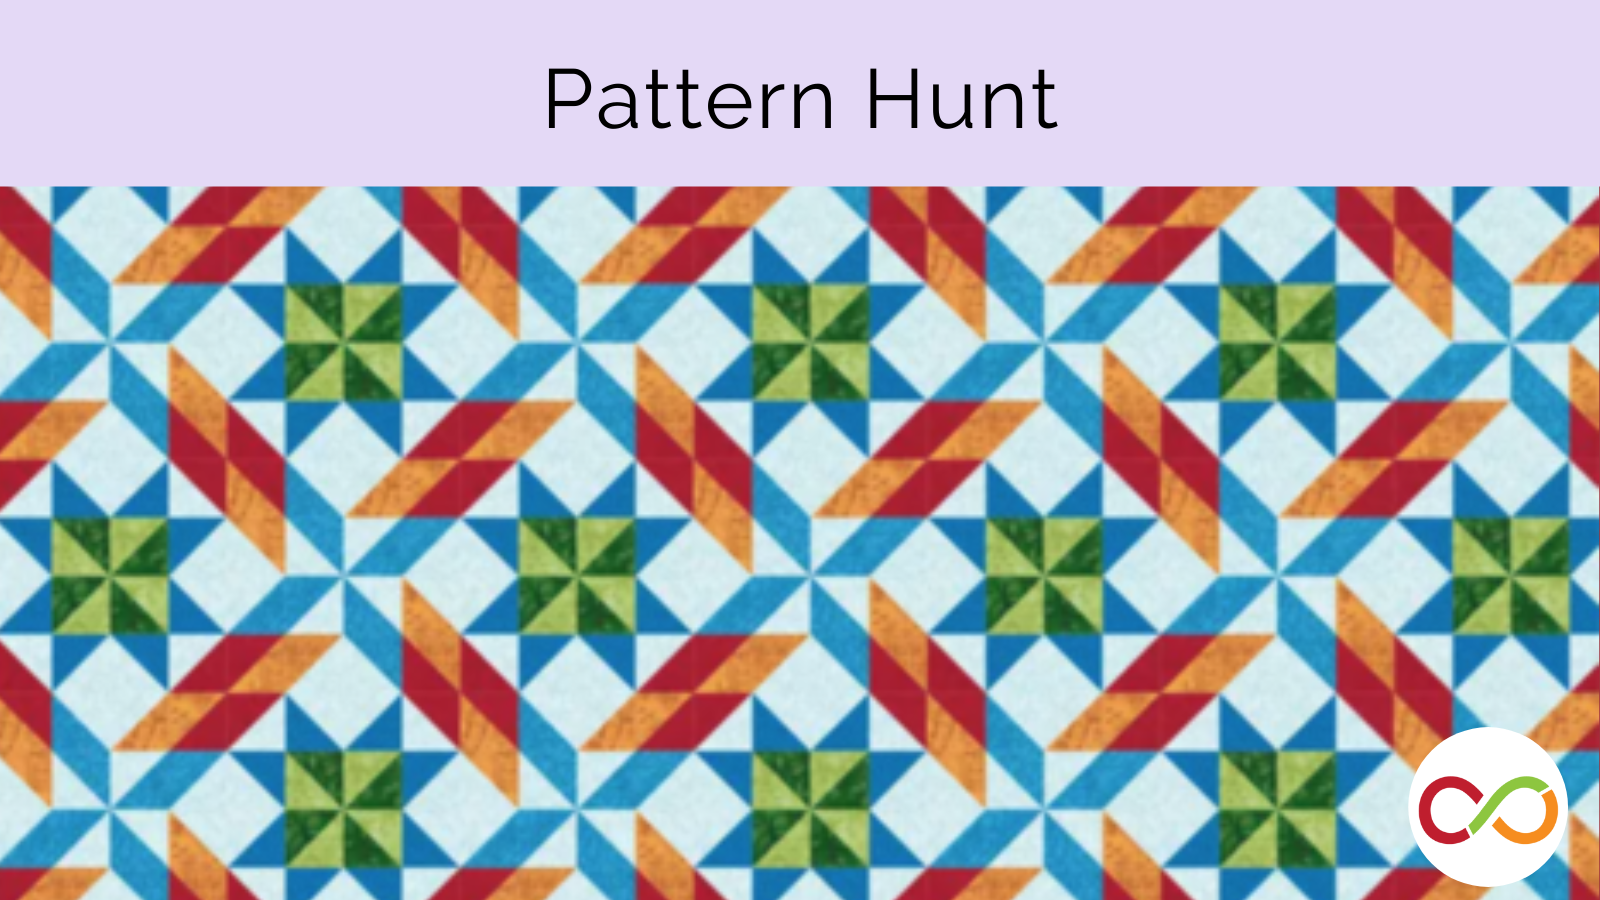 An image linking to the pattern hunt lesson